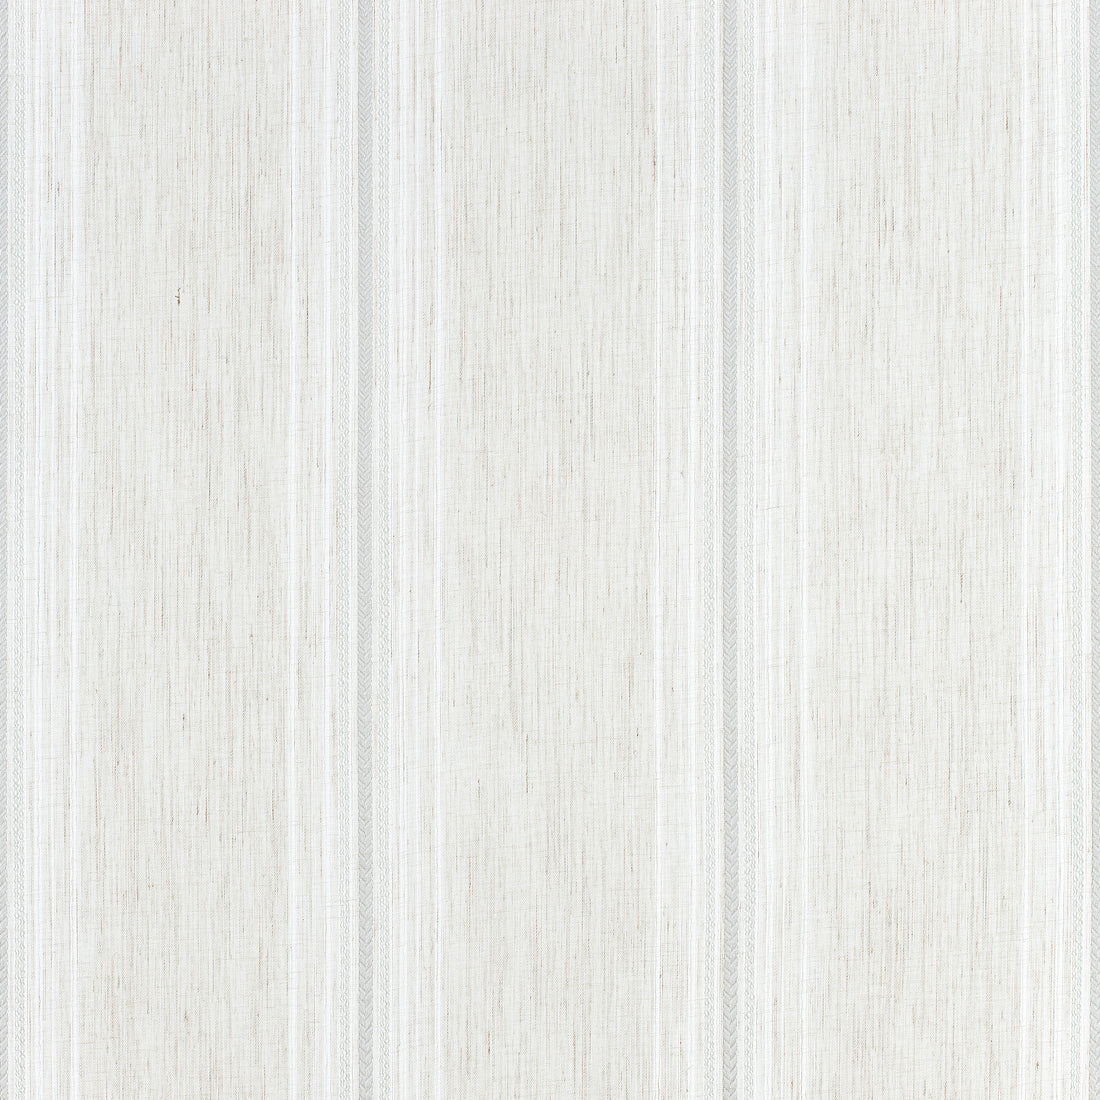 Bromley Stripe fabric in flax color - pattern number FWW7102 - by Thibaut in the Atmosphere collection